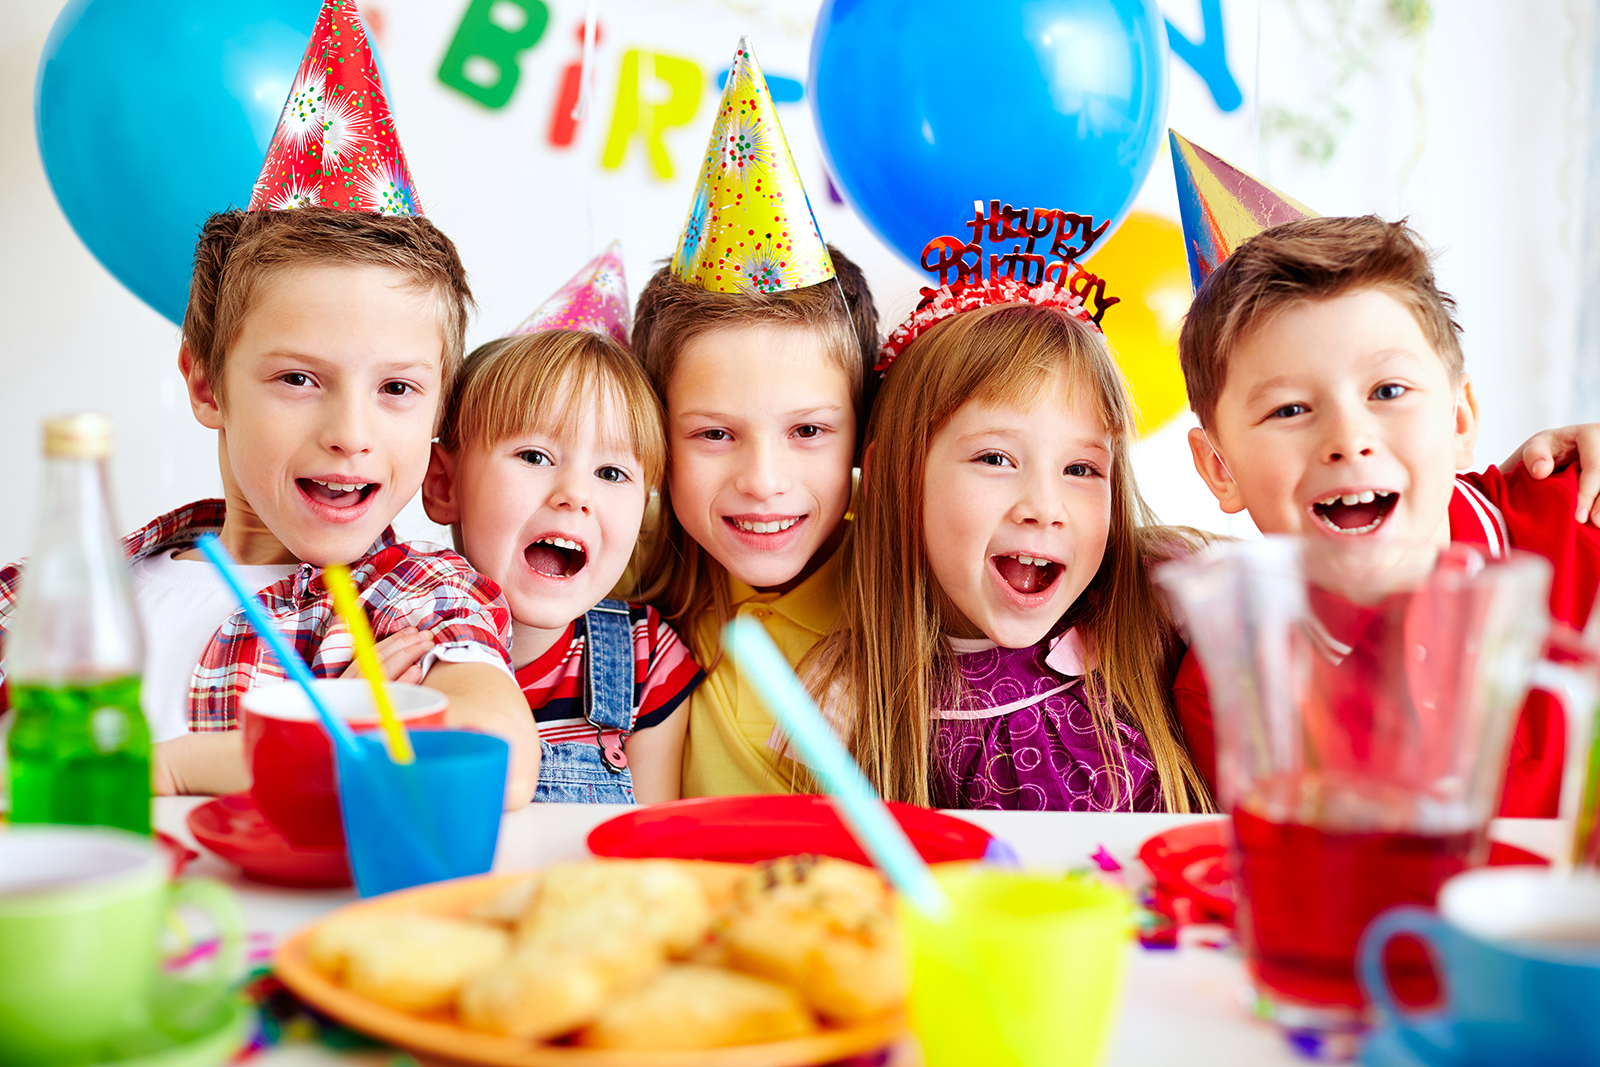 The 5 Challenges to Throwing a Good Kid's Birthday Party